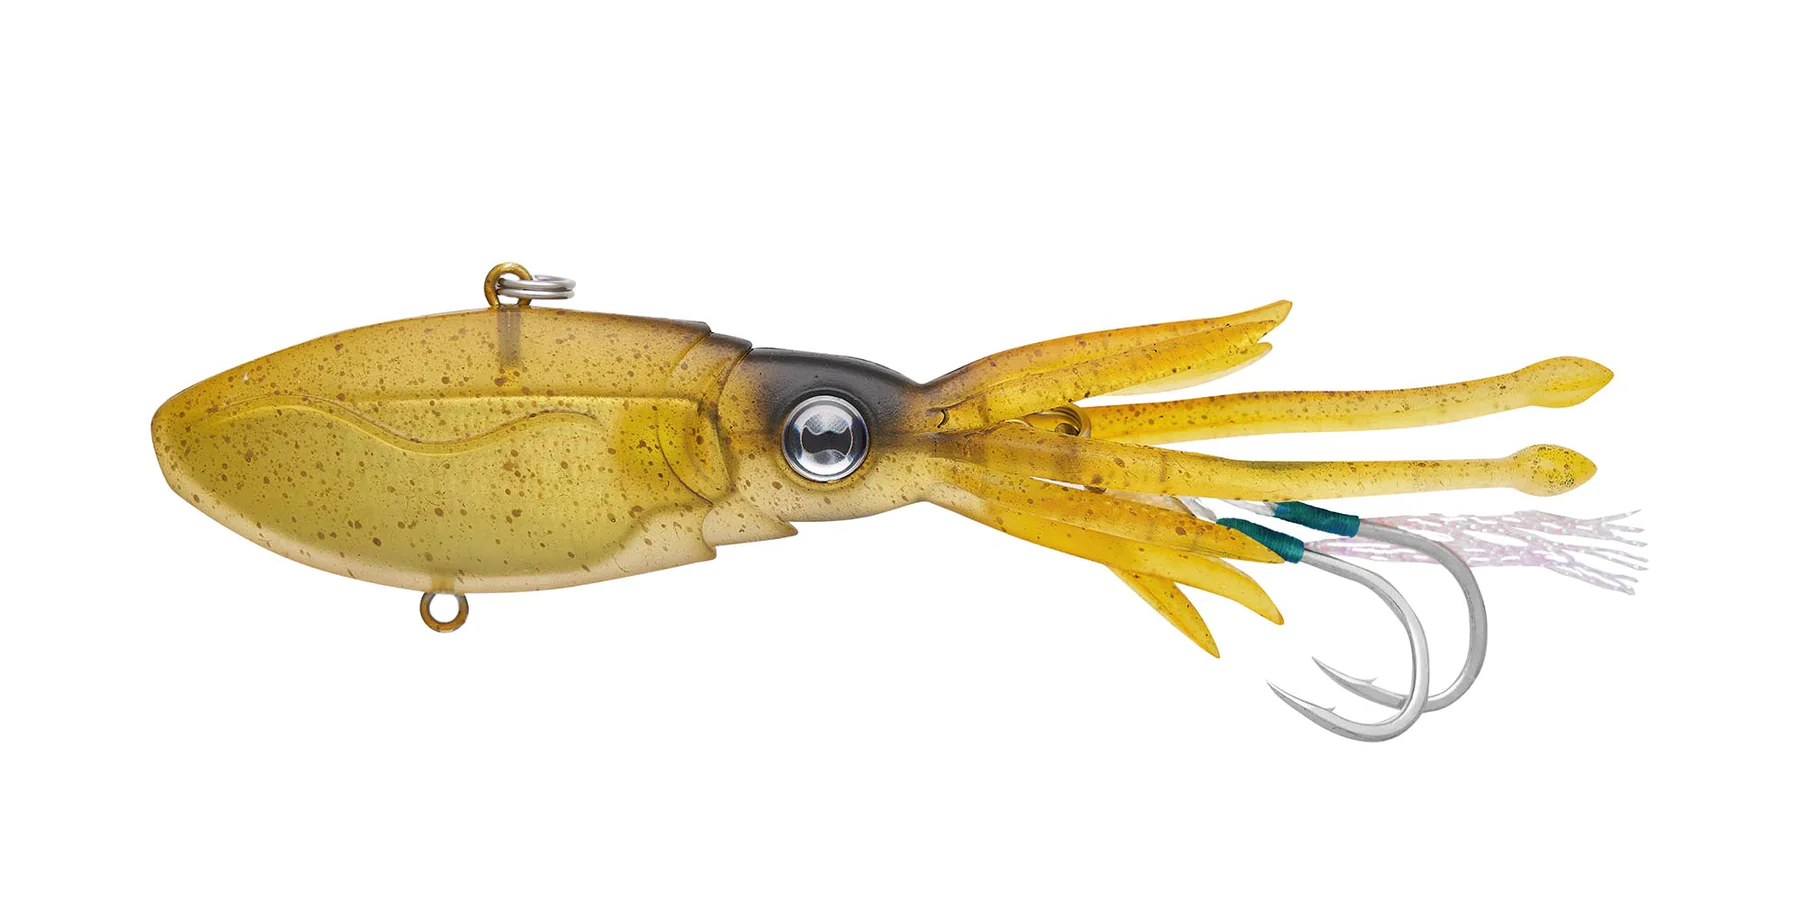 Nomad Design Squid Trex (95mm, 32g Vibration Lure) - Compleat Angler  Ringwood